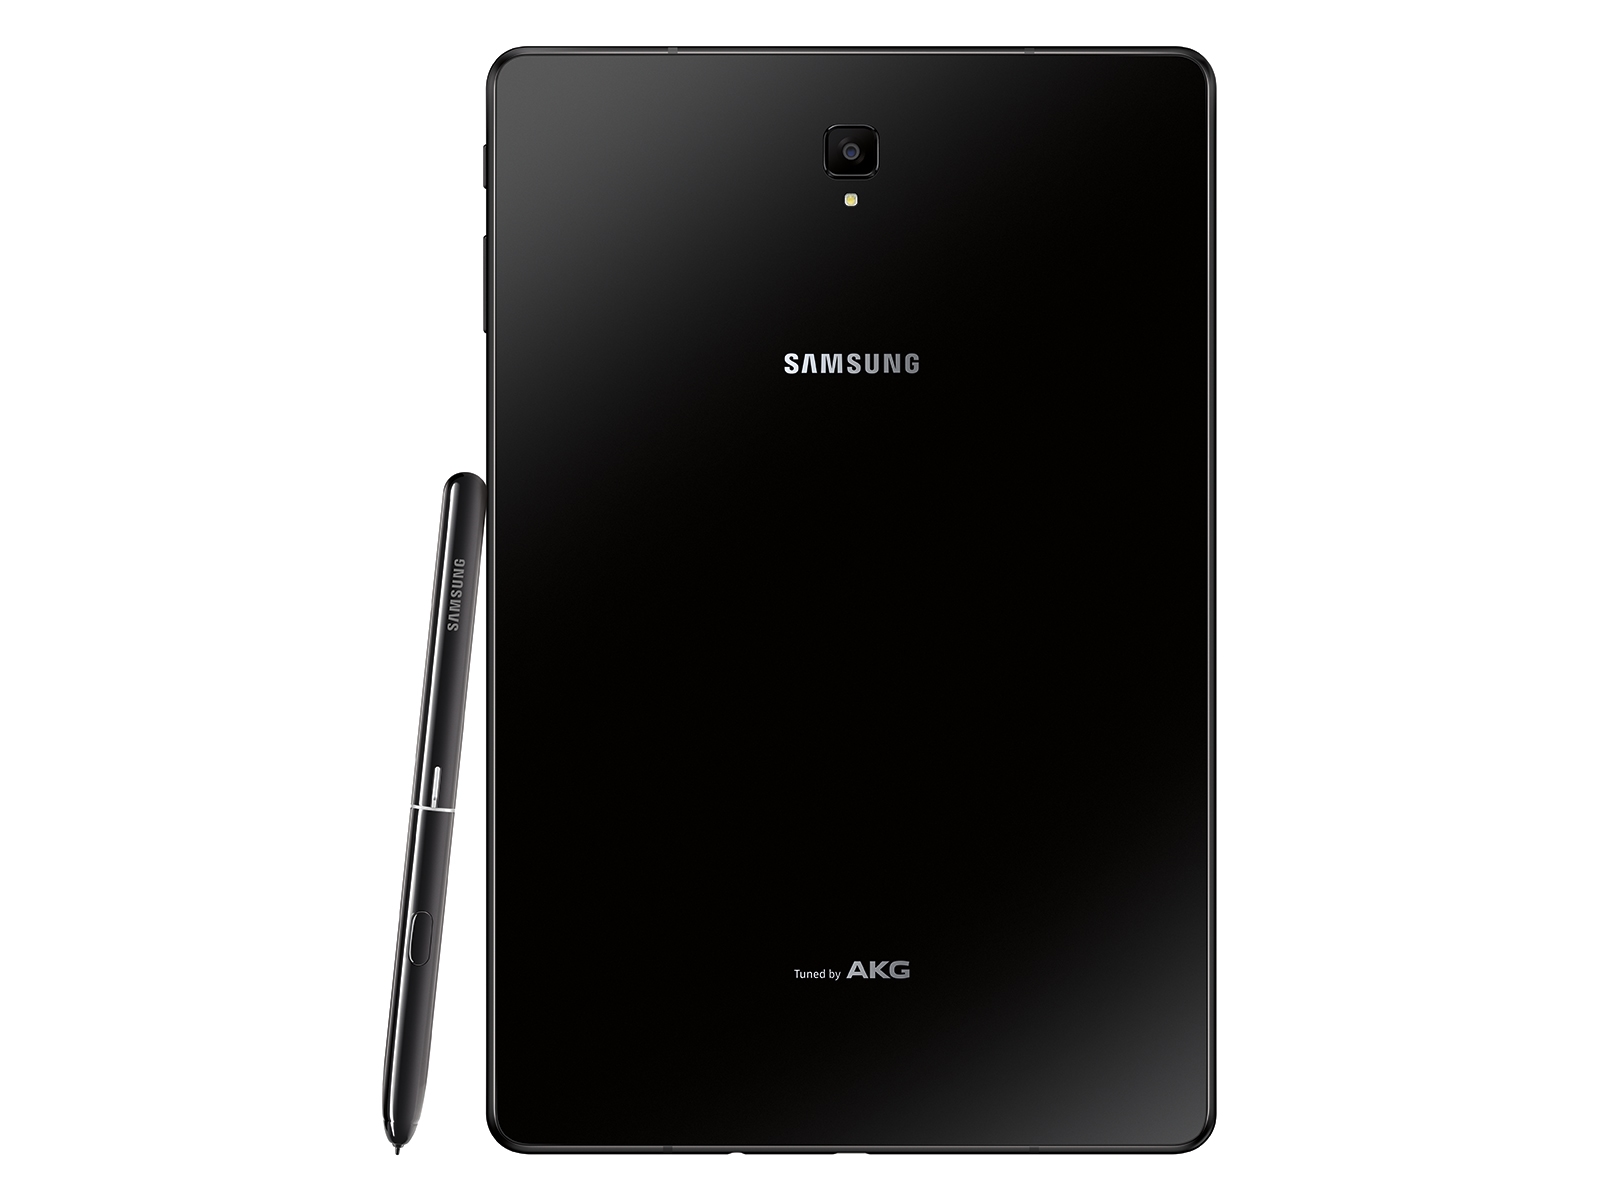 Galaxy Tab S4 10.5” (S Pen included), 64GB, Black, T-Mobile